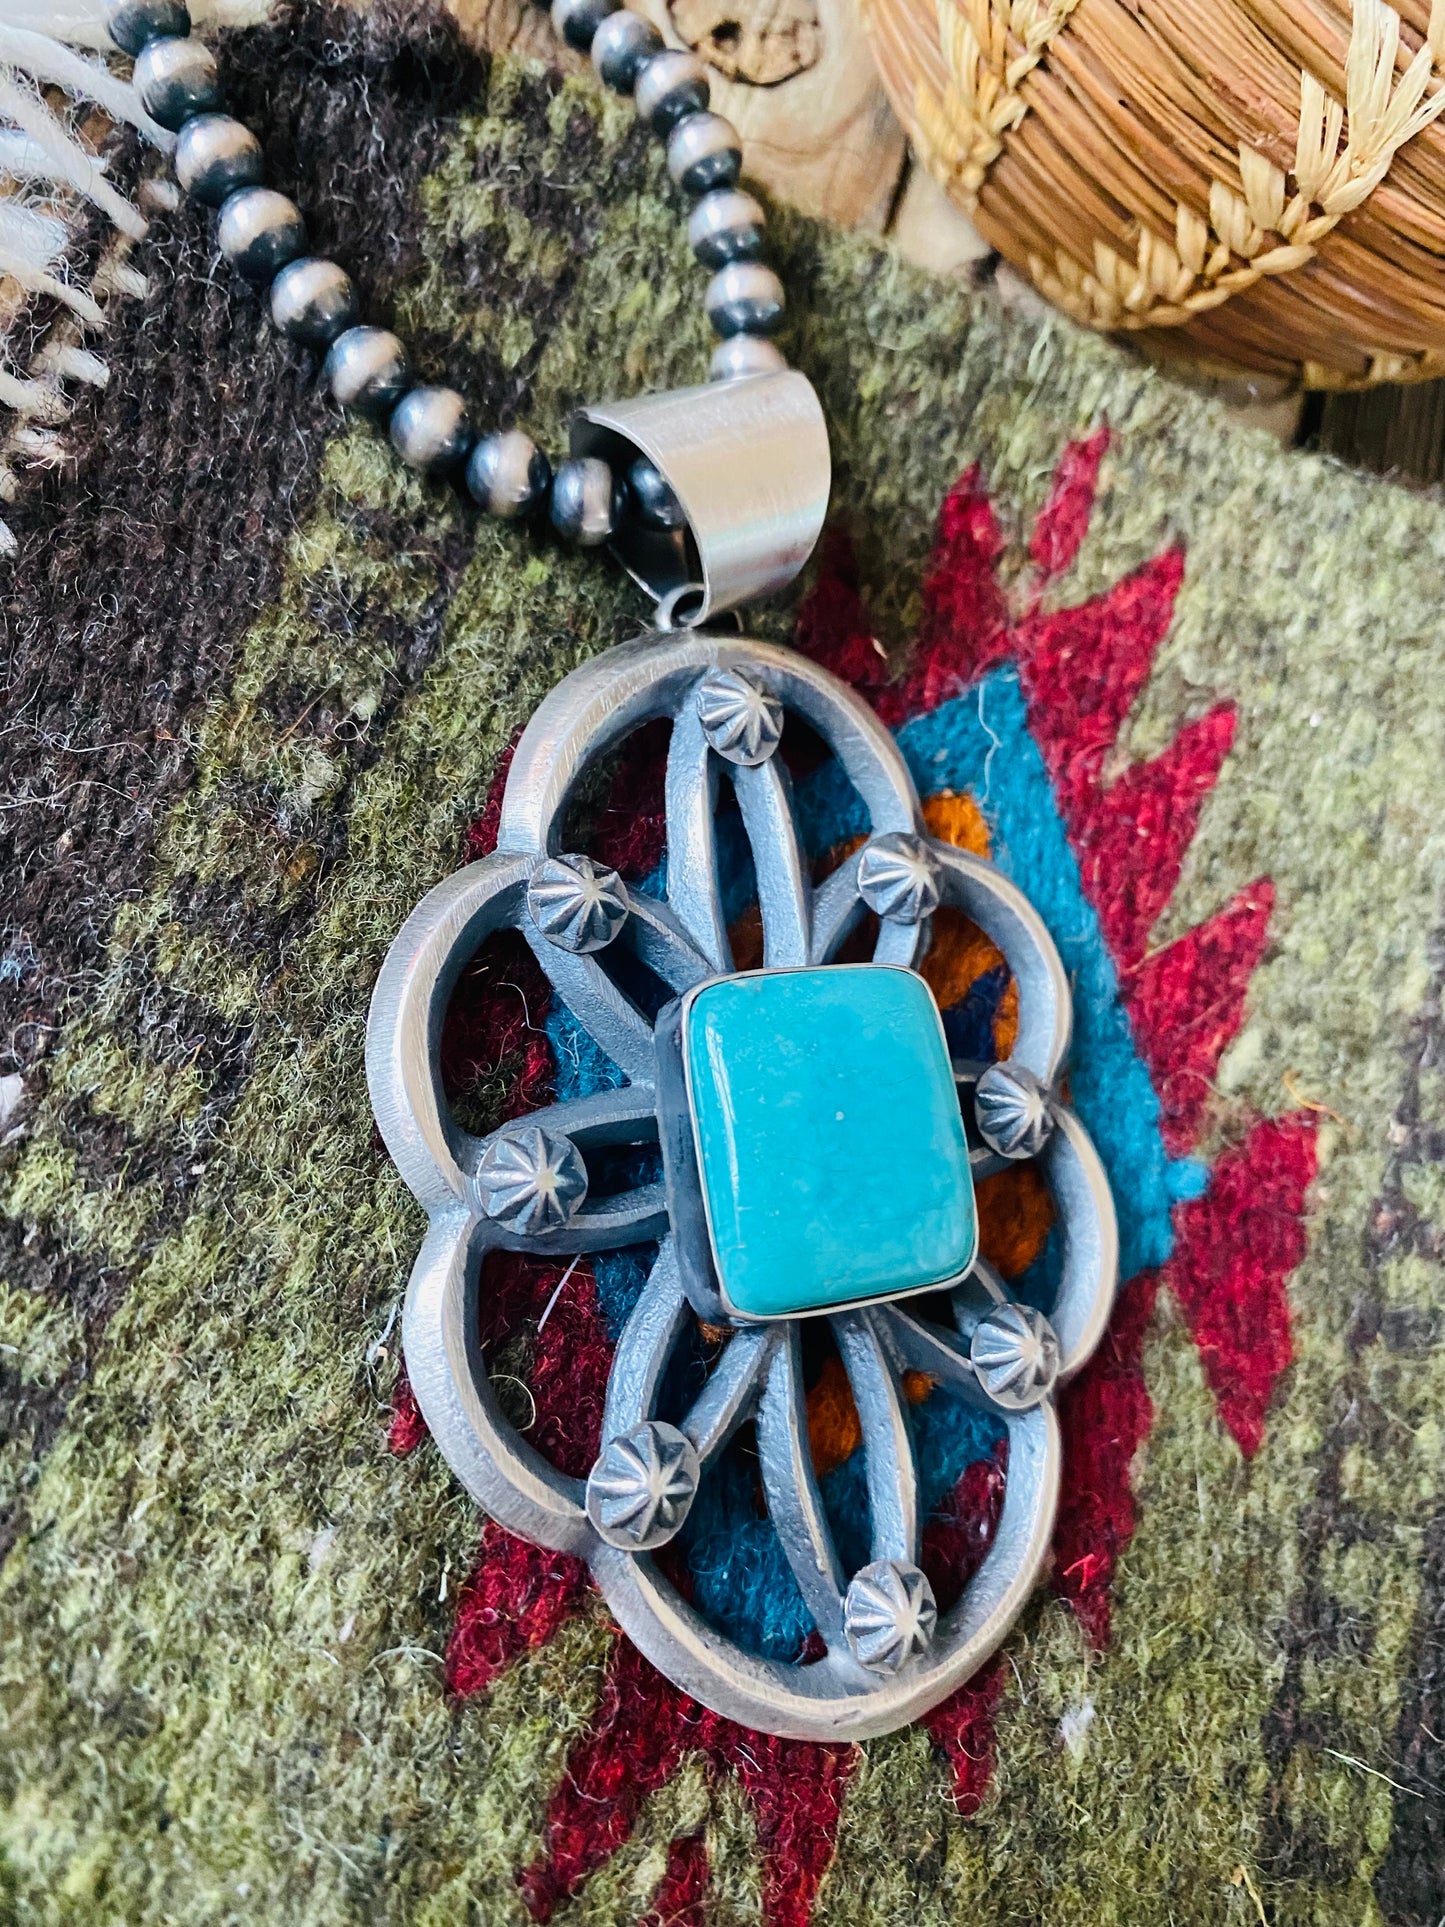 Navajo Sterling Silver & Turquoise Pendant By Chimney Butte